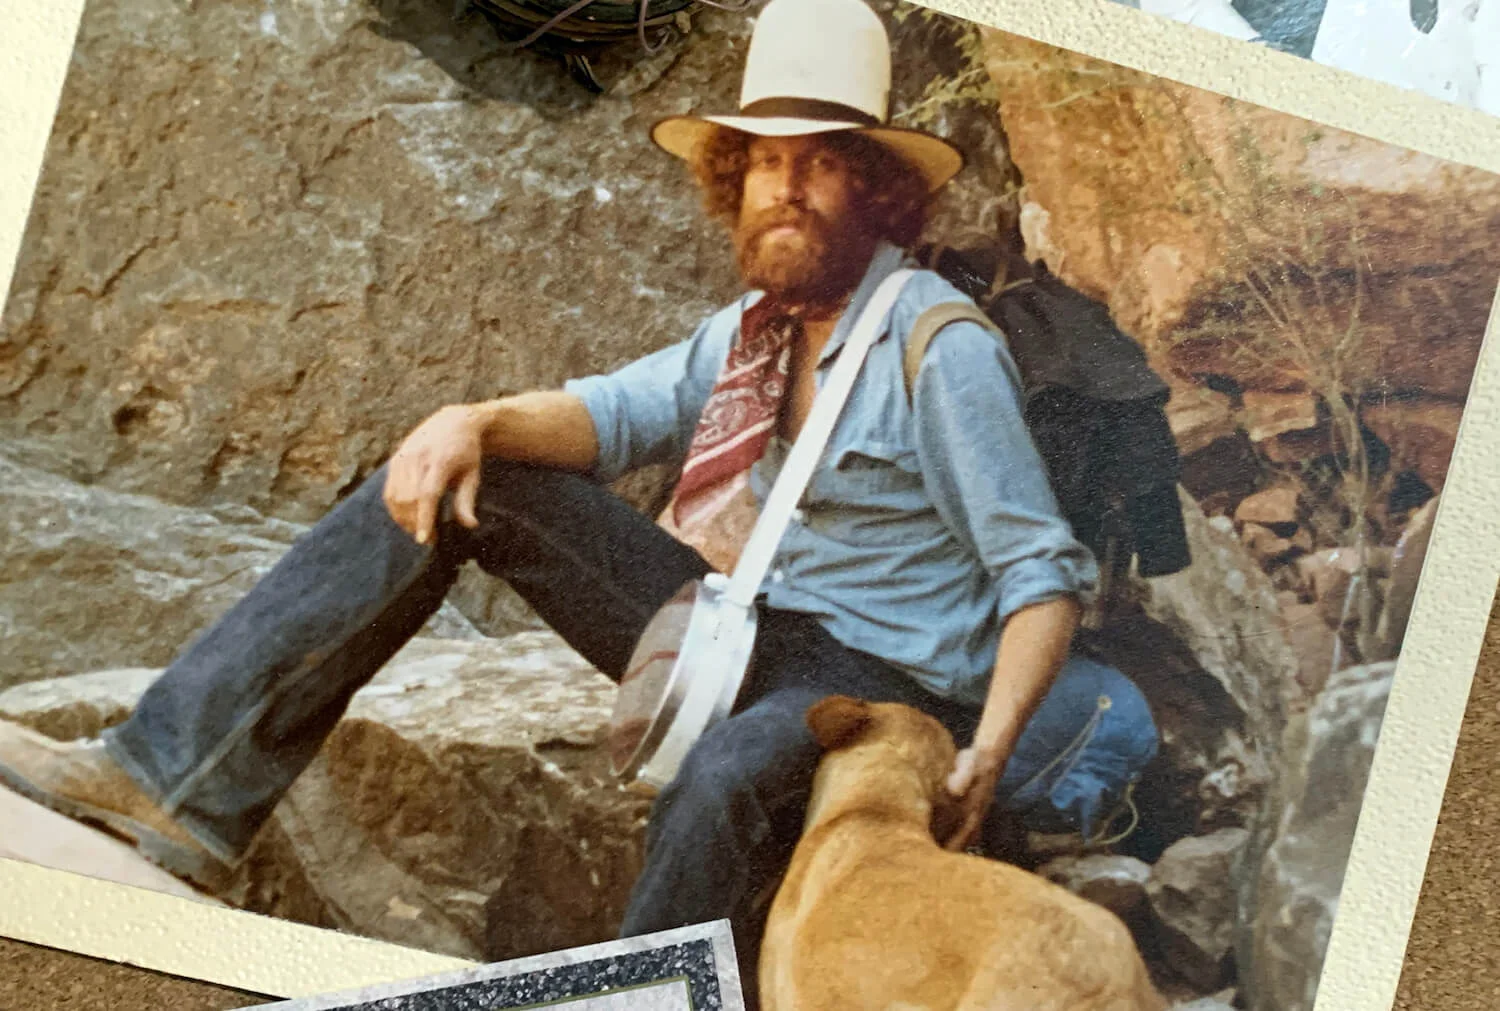 Jerry as a young man, sitting on rocks with a canteen, big hat, and a dog